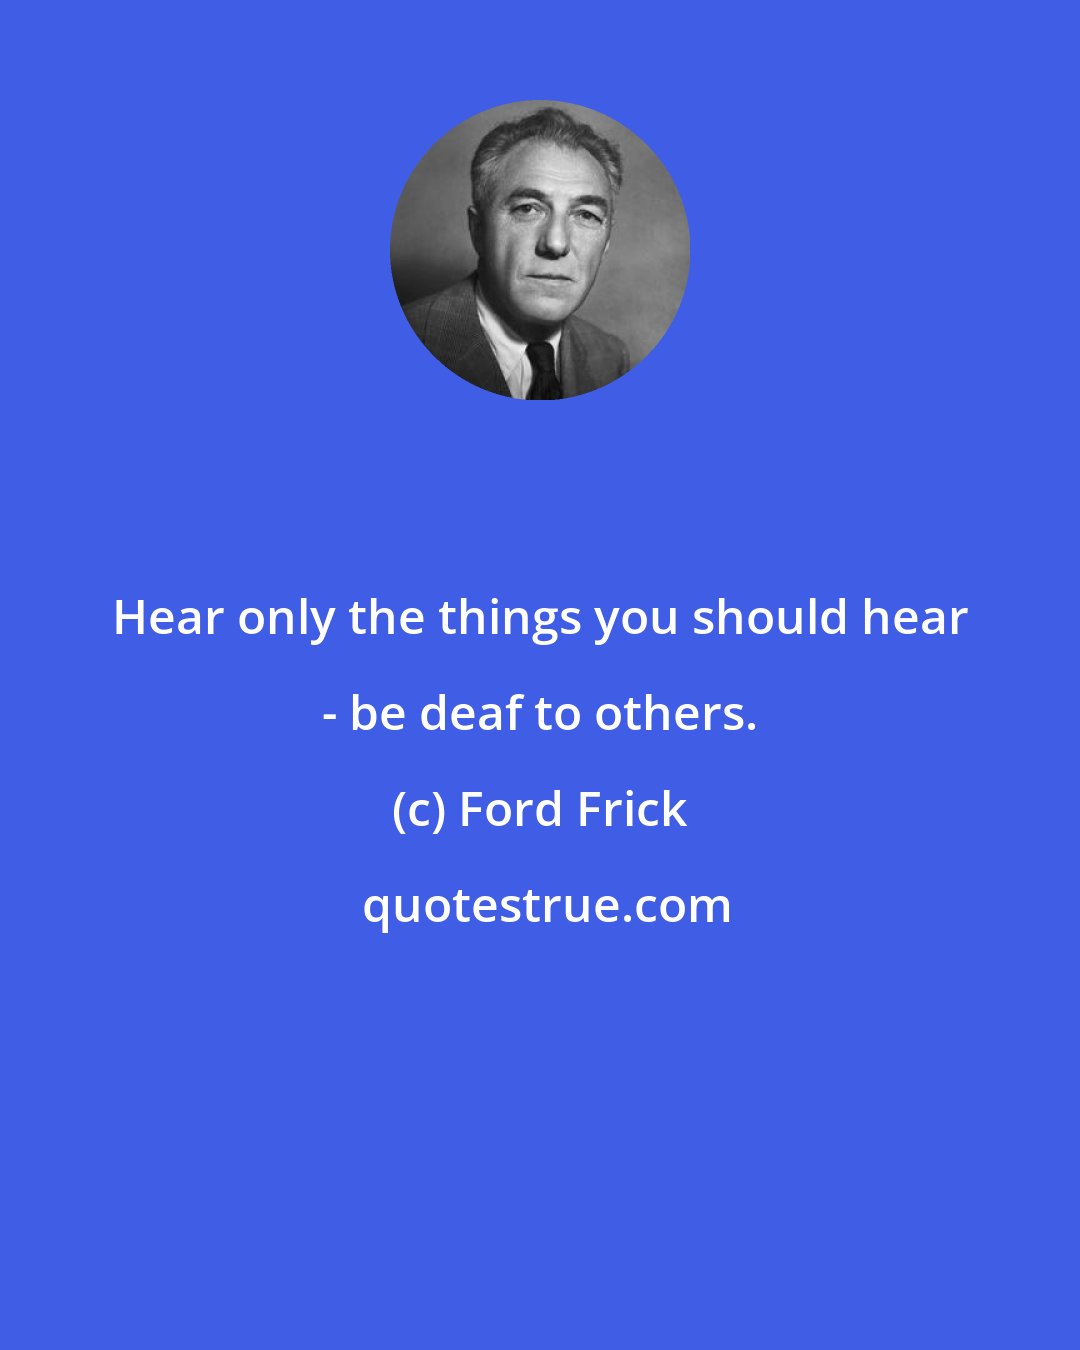 Ford Frick: Hear only the things you should hear - be deaf to others.